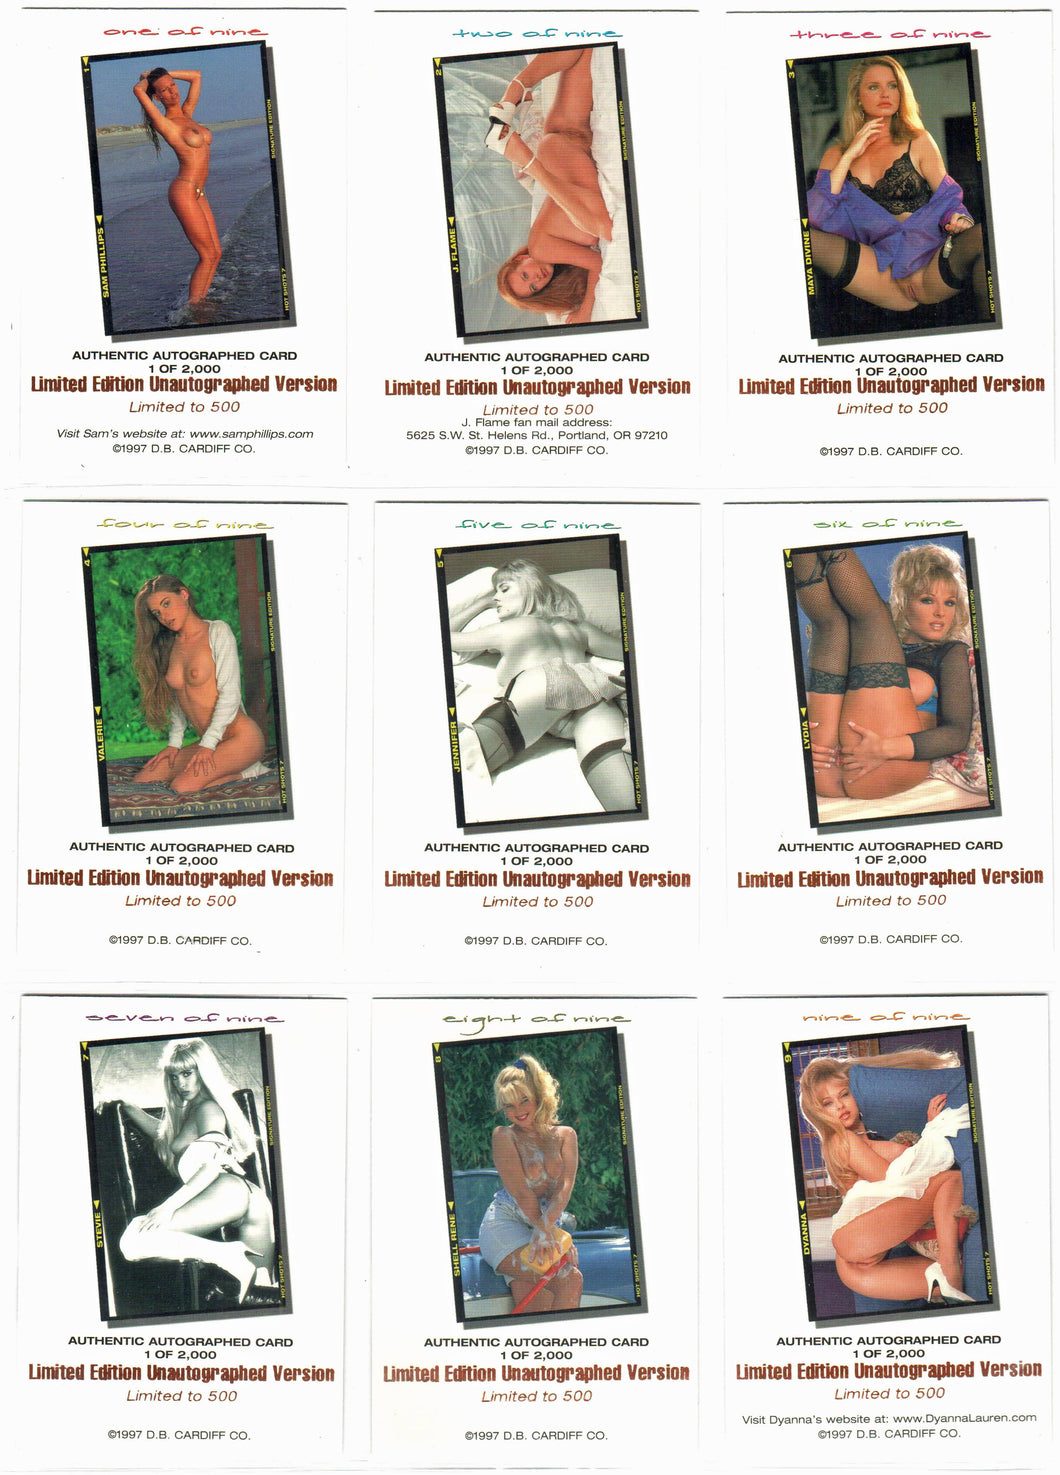 Hot Shots - series 7 - Limited Ed Unautographed Version set [9 cards] [copper foil] [these cards are not signed]